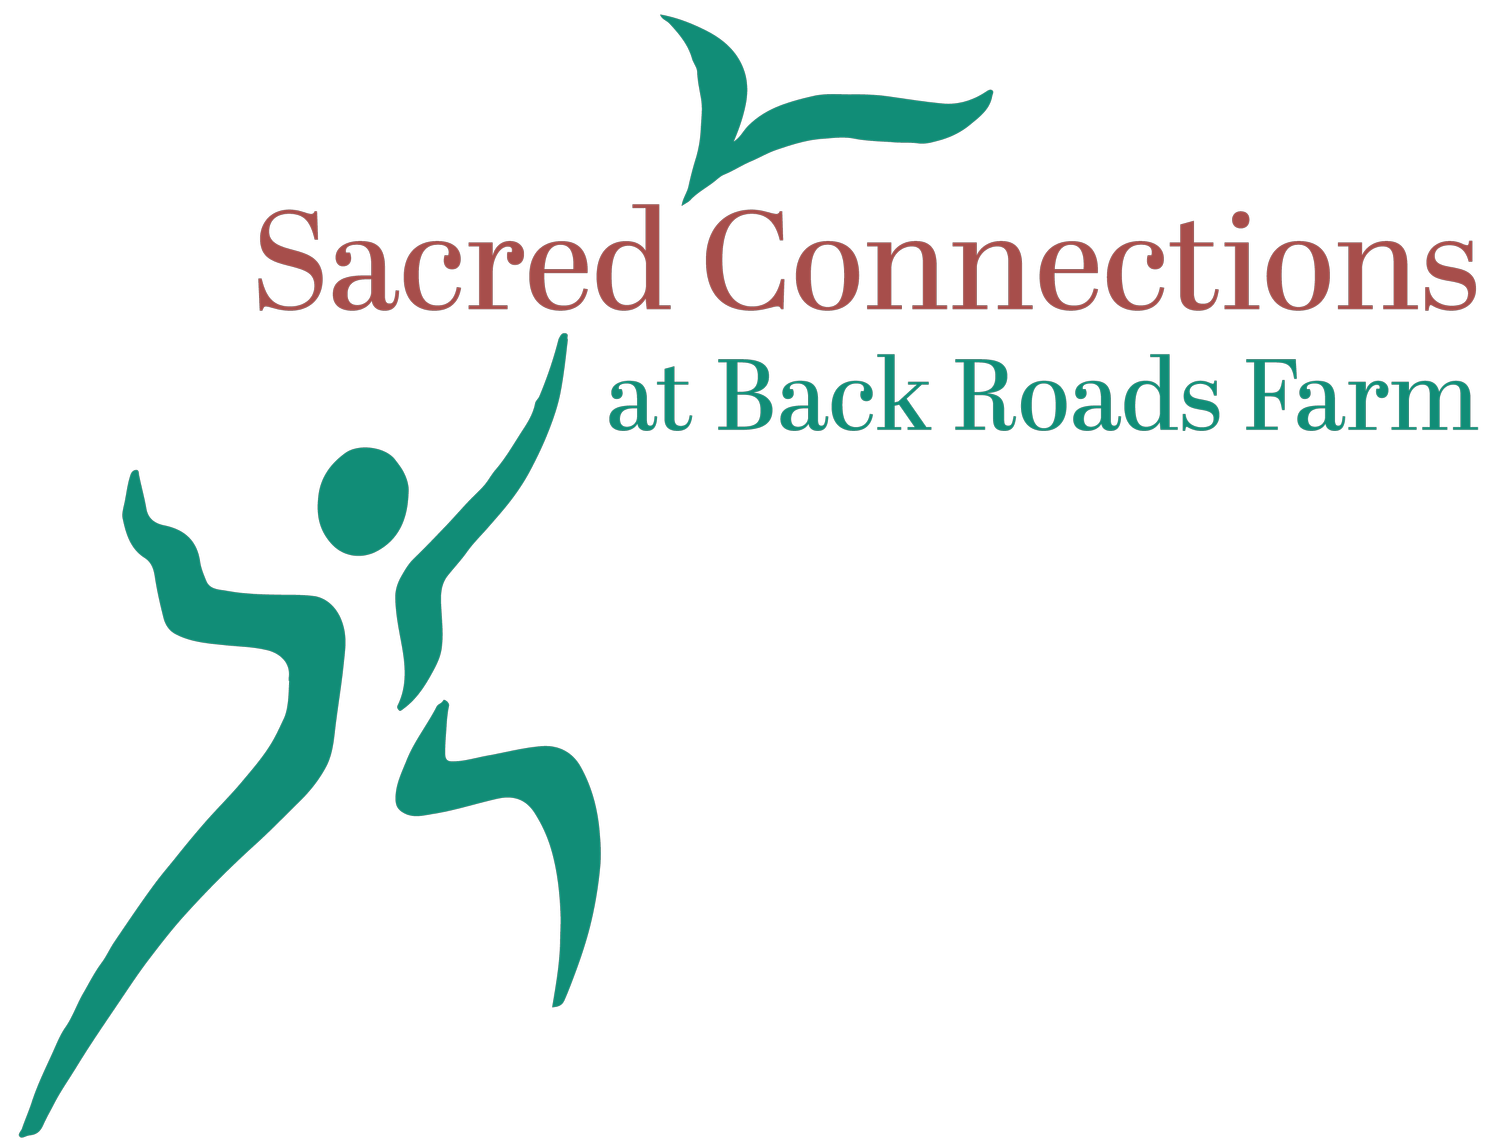 Sacred Connections at Back Roads Farm | Cabot Vermont